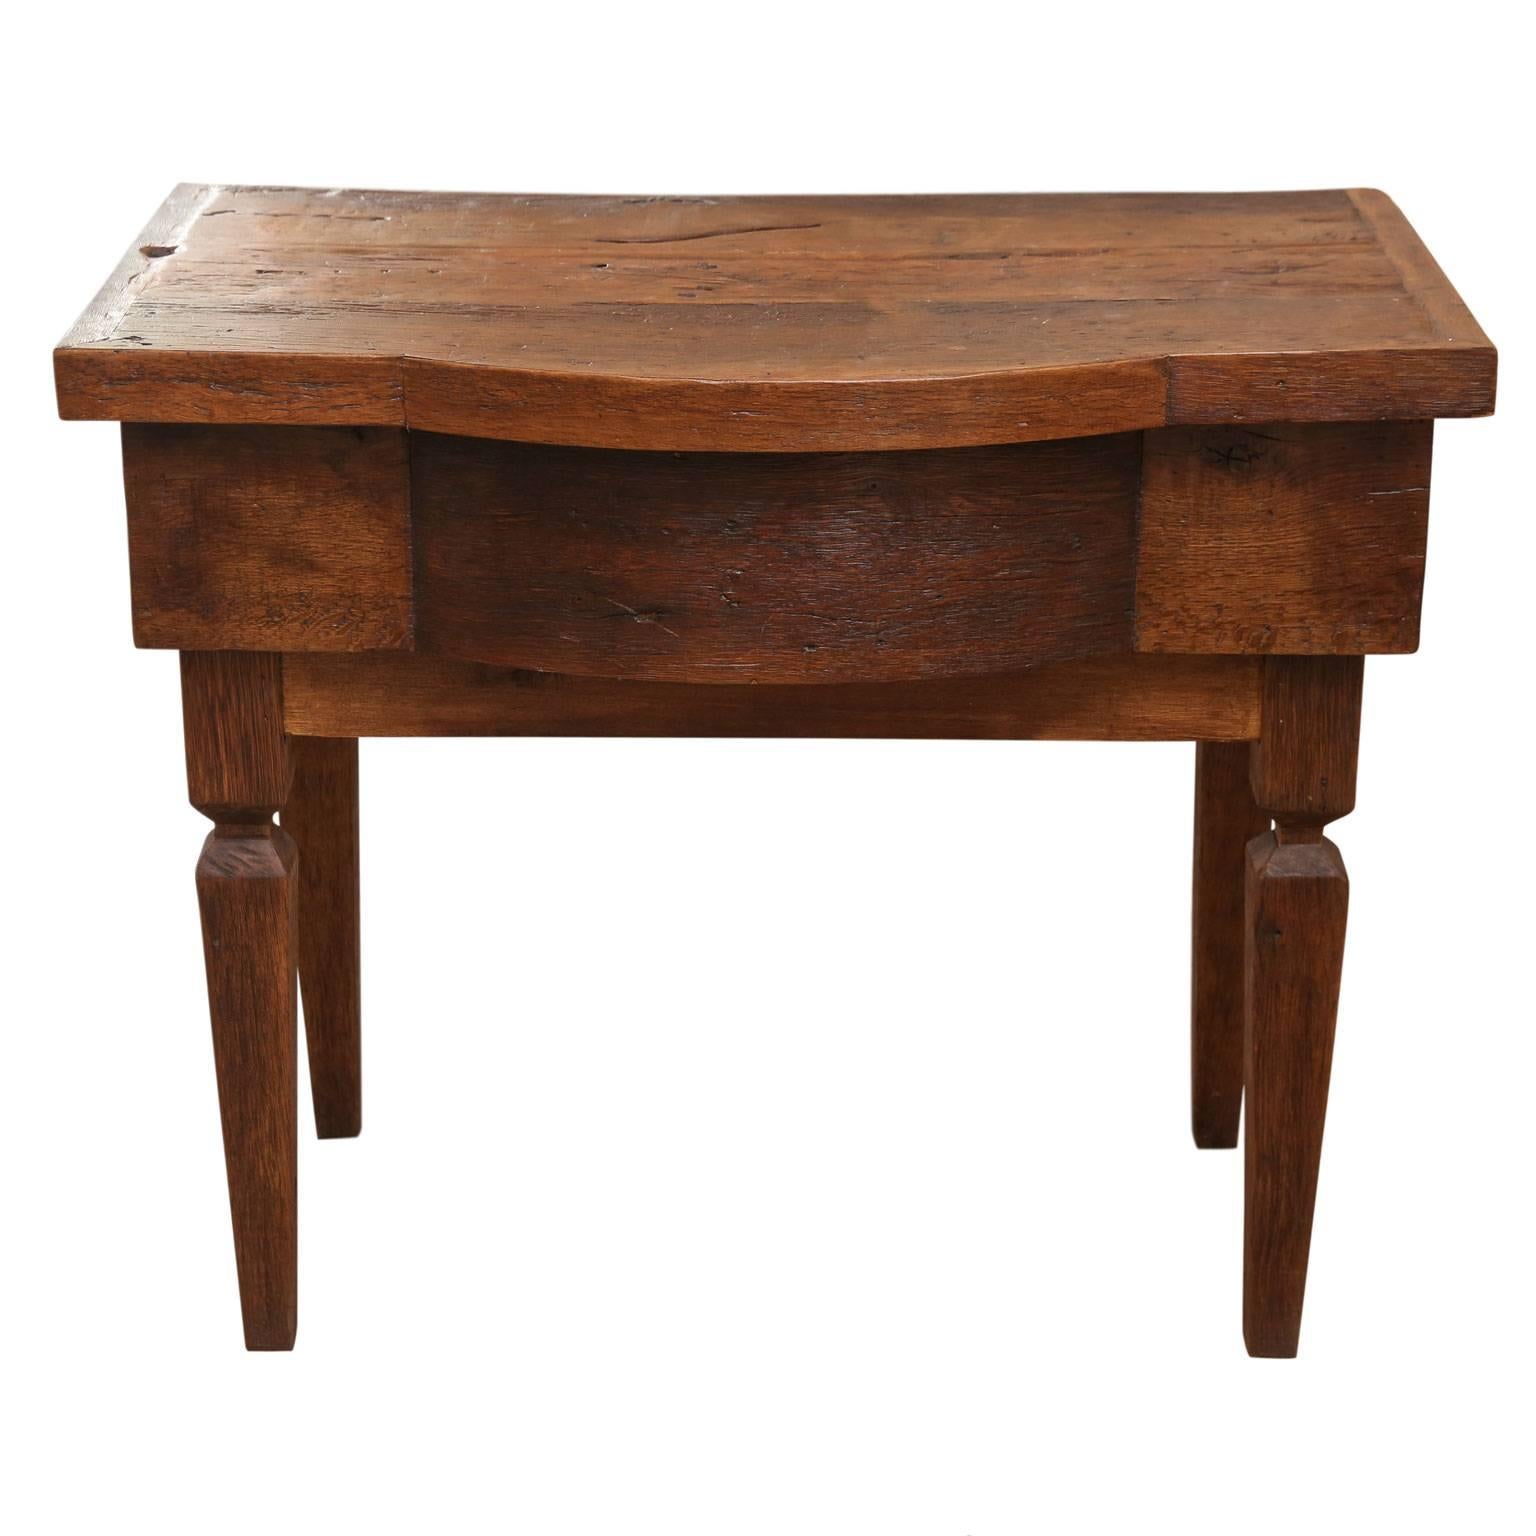 French walnut vanity table newly constructed from antique wood. Bow-front shape upper portion, raised on squared tapered legs, with hollow space (to conceal plumbing). Hollow interior space lined with a protective layer of plywood.